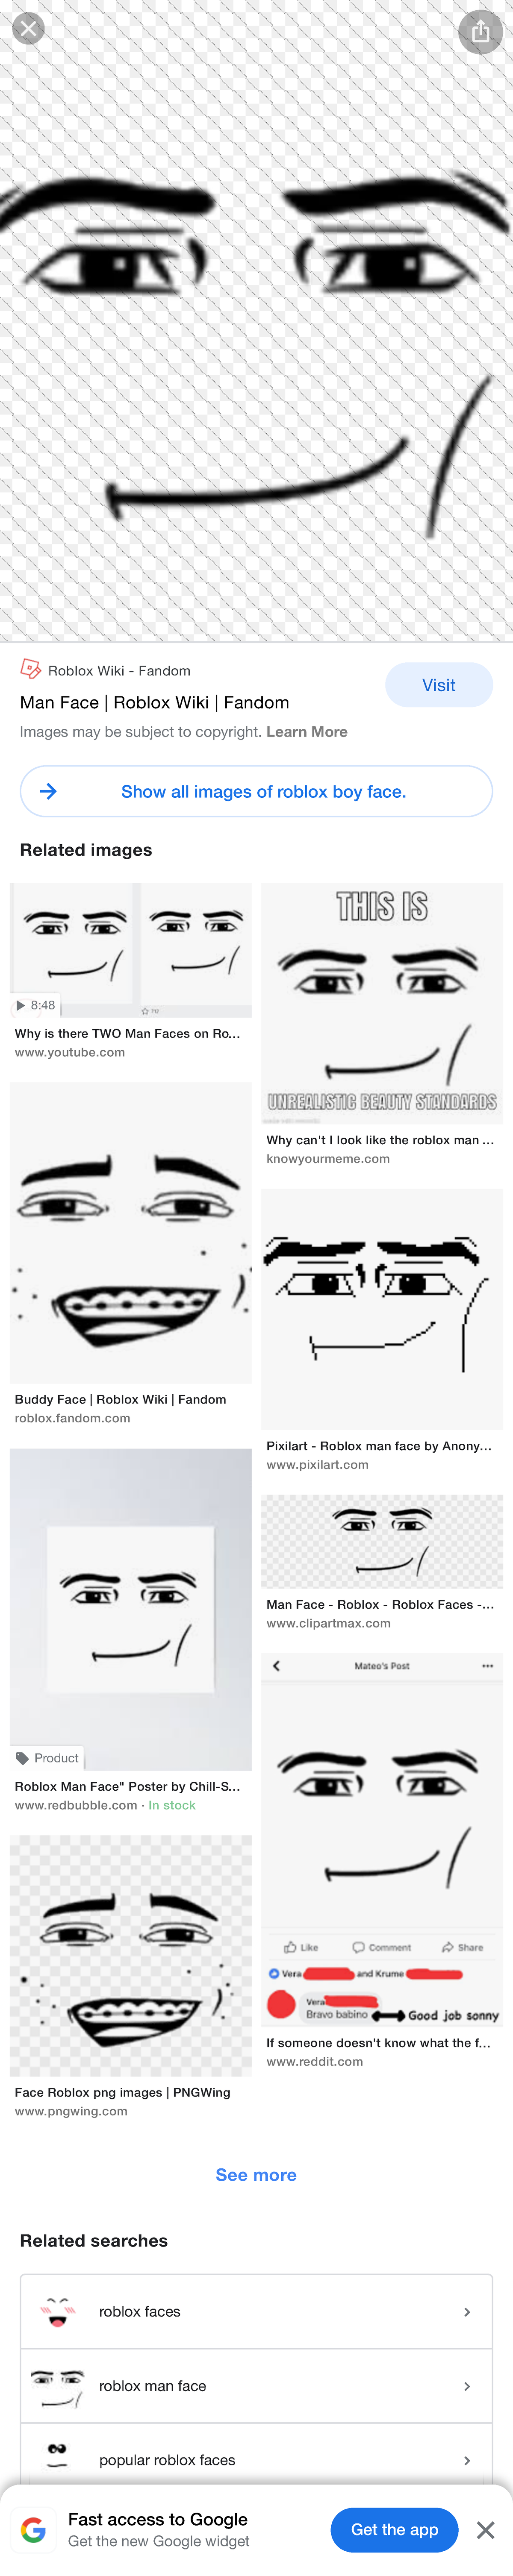 Screenshot 2021-10-05 at 1.05.39 PM - roblox boy face. Man Face is a face  that was published in the - Studocu